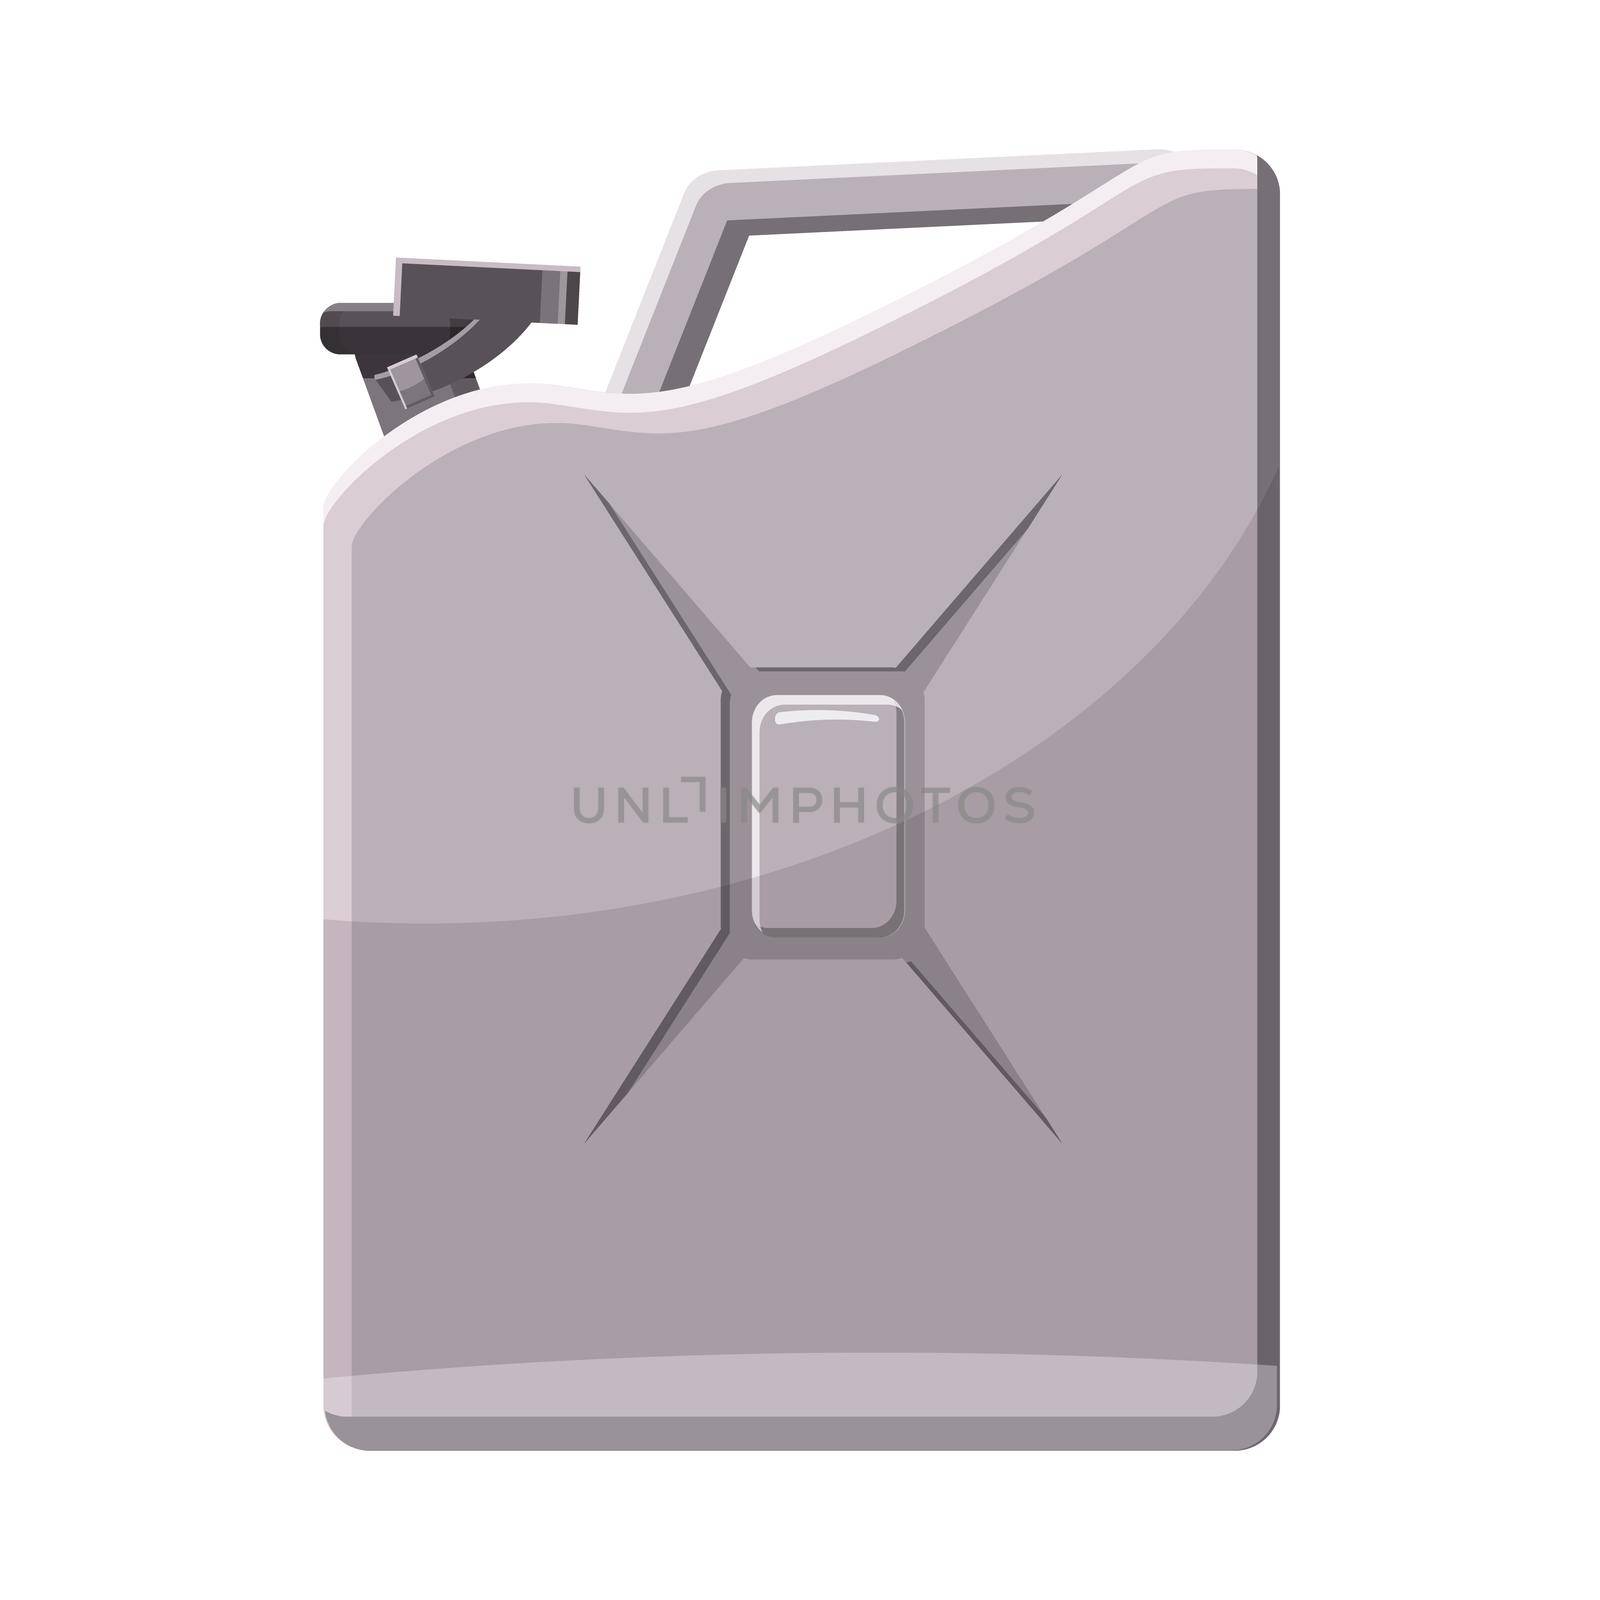 Metalic jerrycan icon in cartoon style on a white background